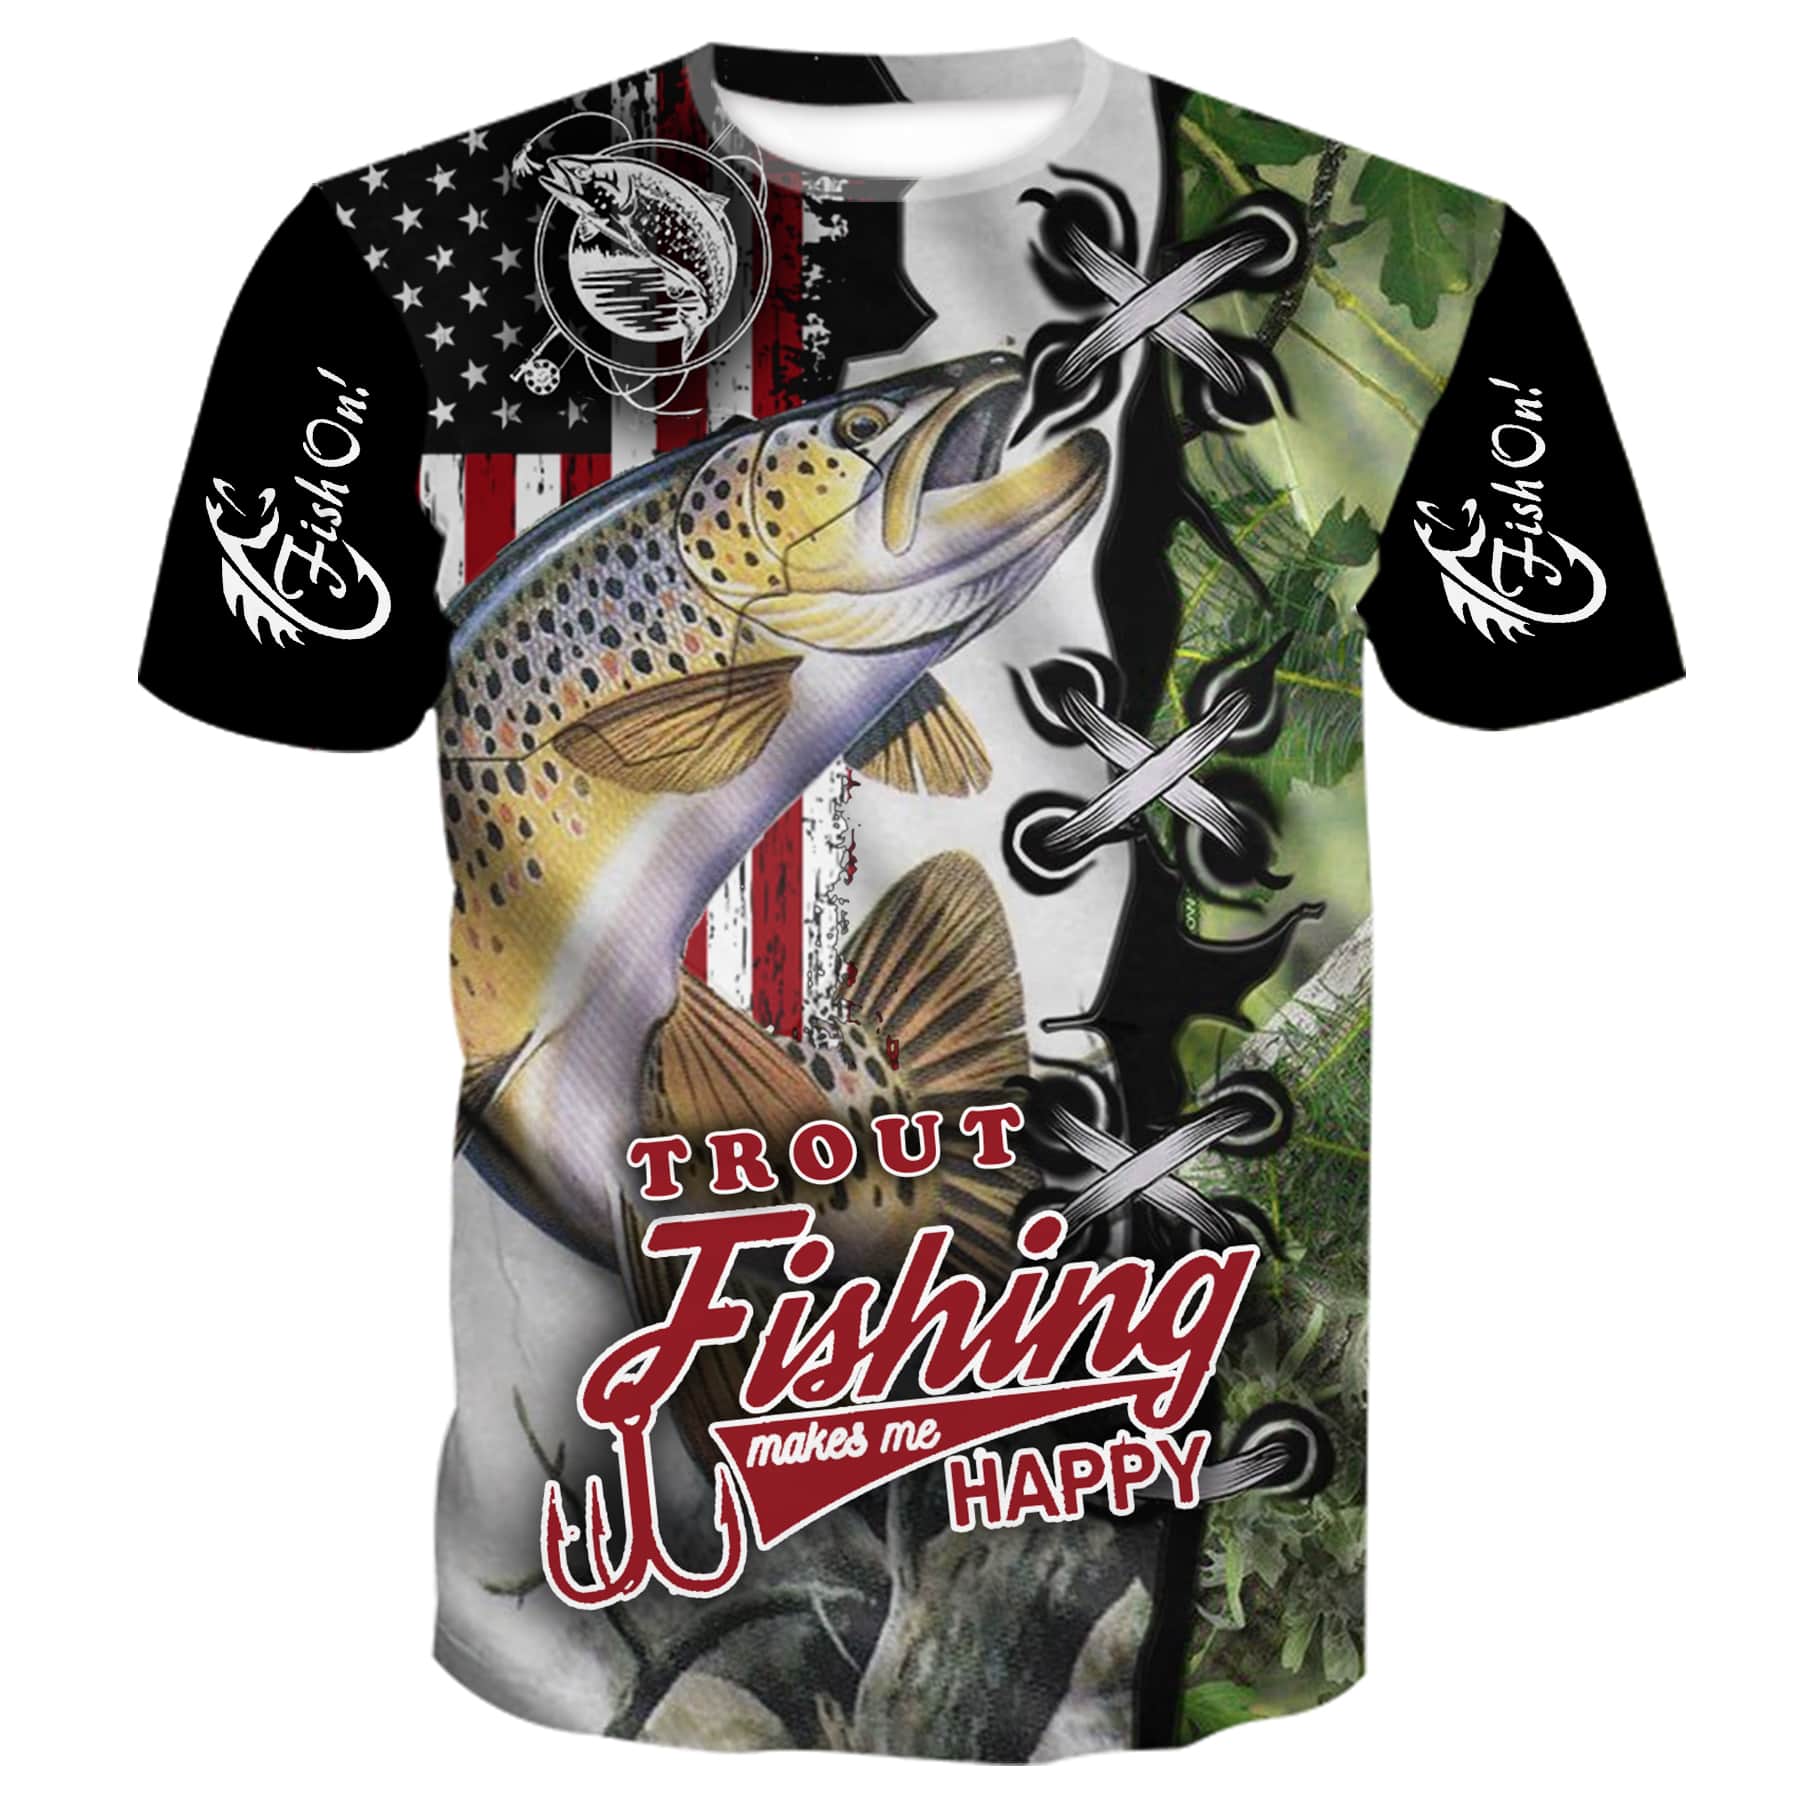 Trout Fishing makes me happy - Kid's T-Shirt